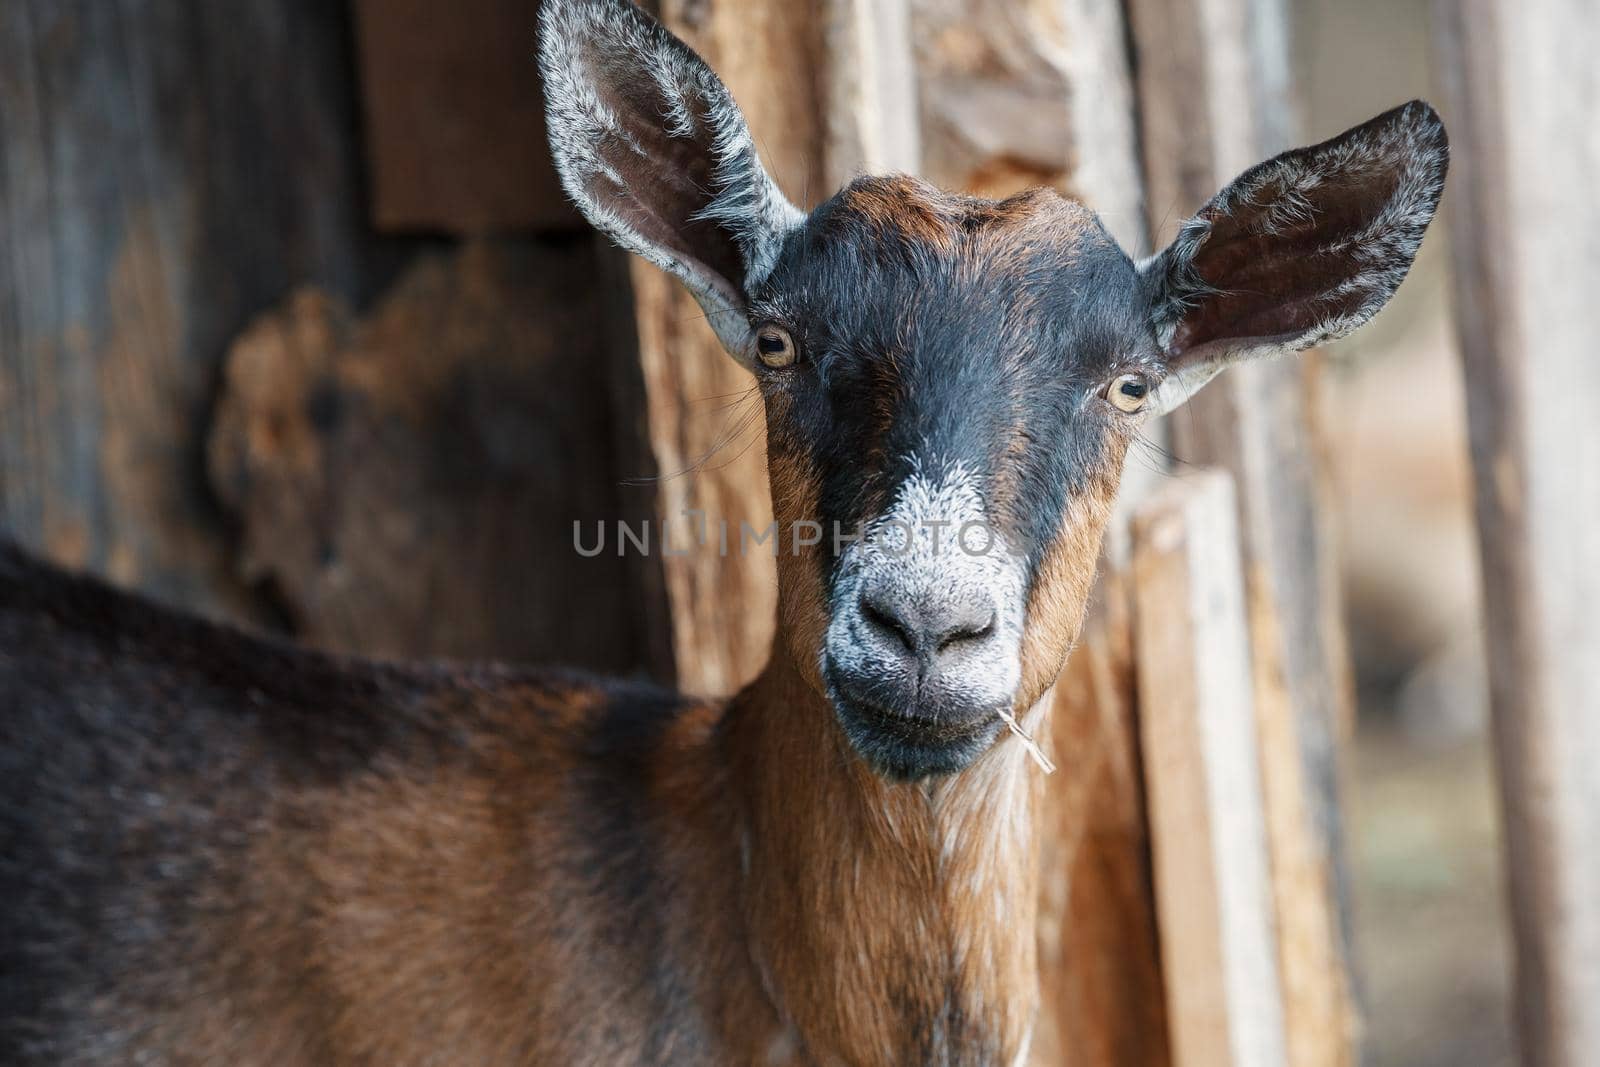 A close-up portrait of a young brown and black goat with straw in his mouth